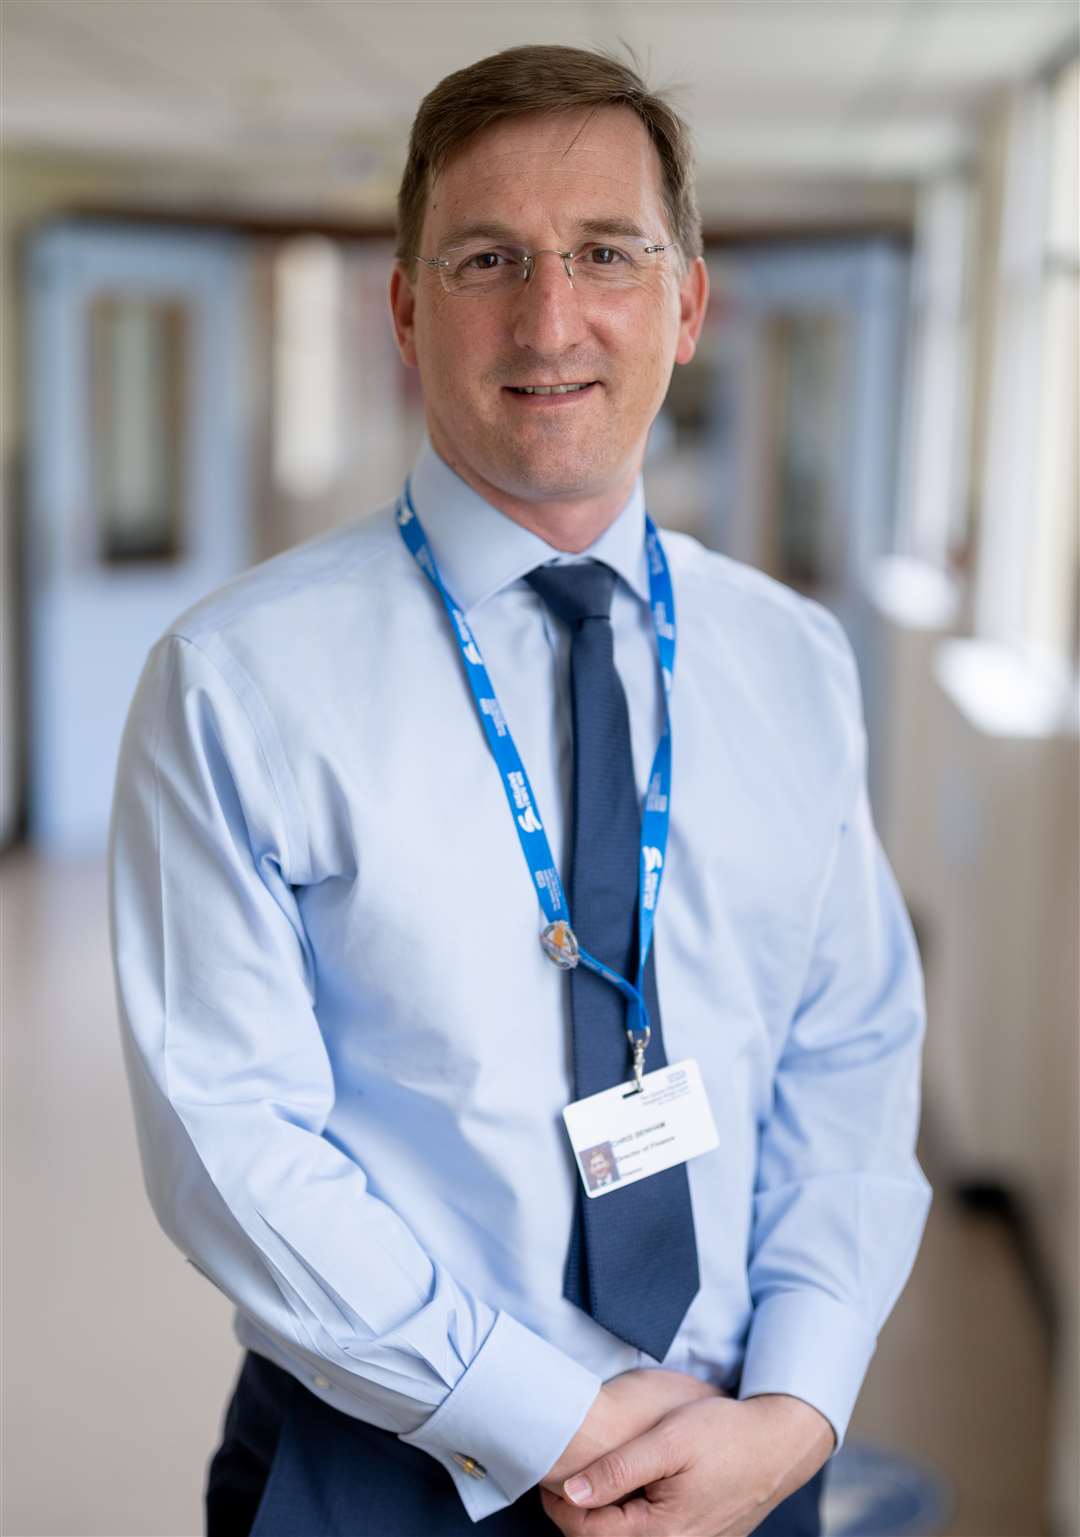 Acting deputy CEO and director of finance at the QEH Chris Benham